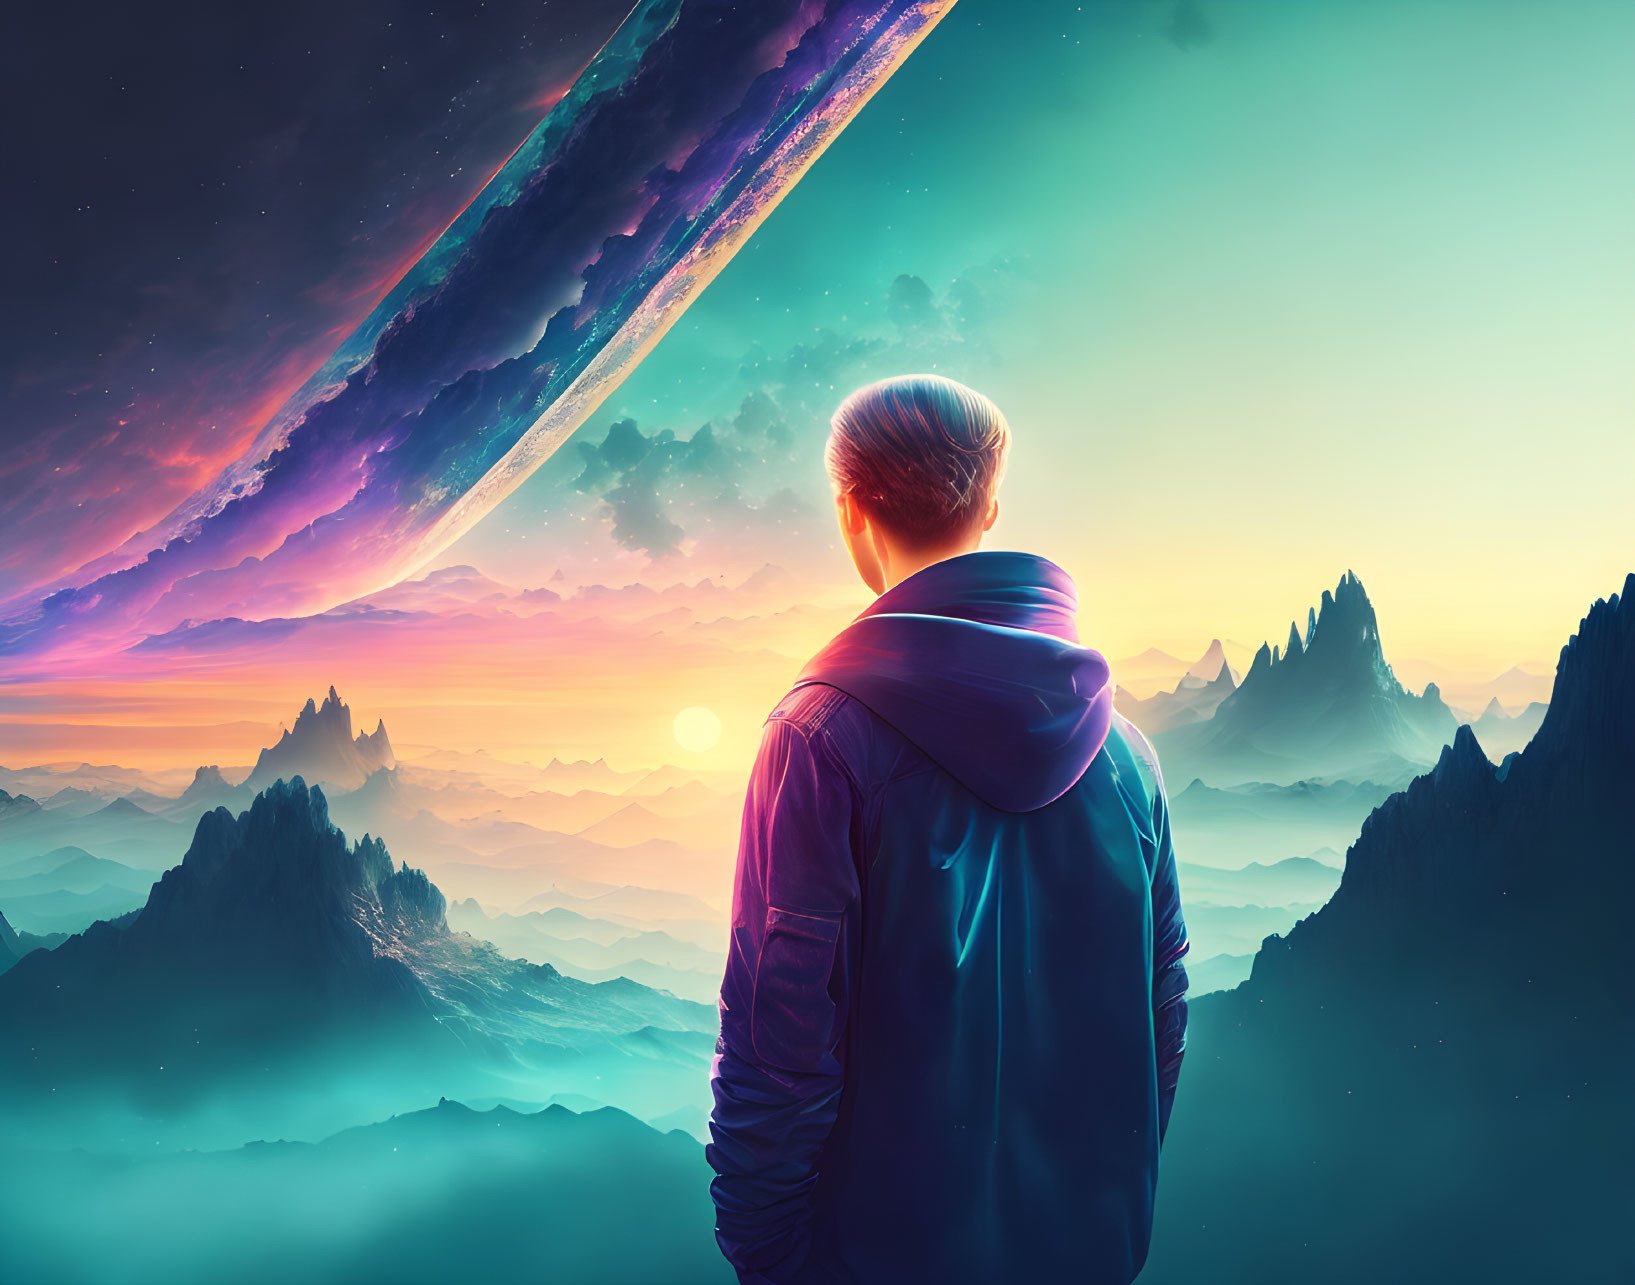 Person facing vibrant sunset with mountains and ringed planet